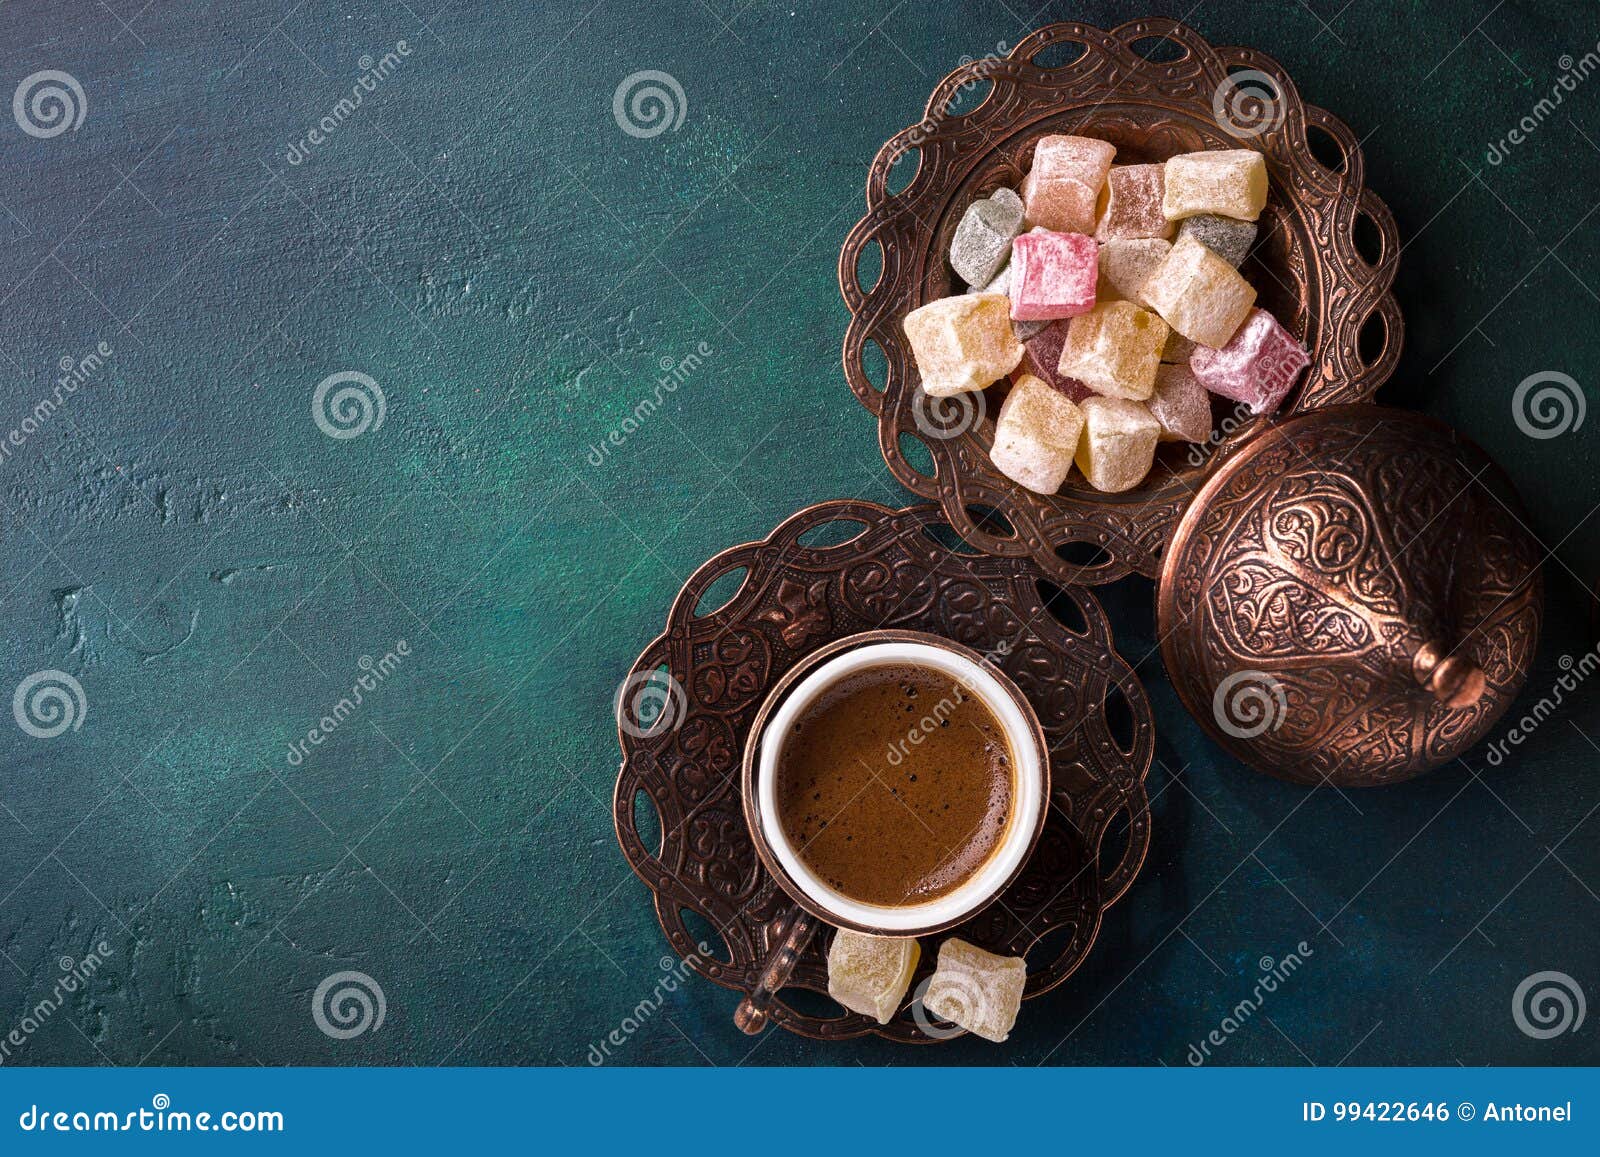 traditional turkish coffee and turkish delight on dark green wooden background. flat lay